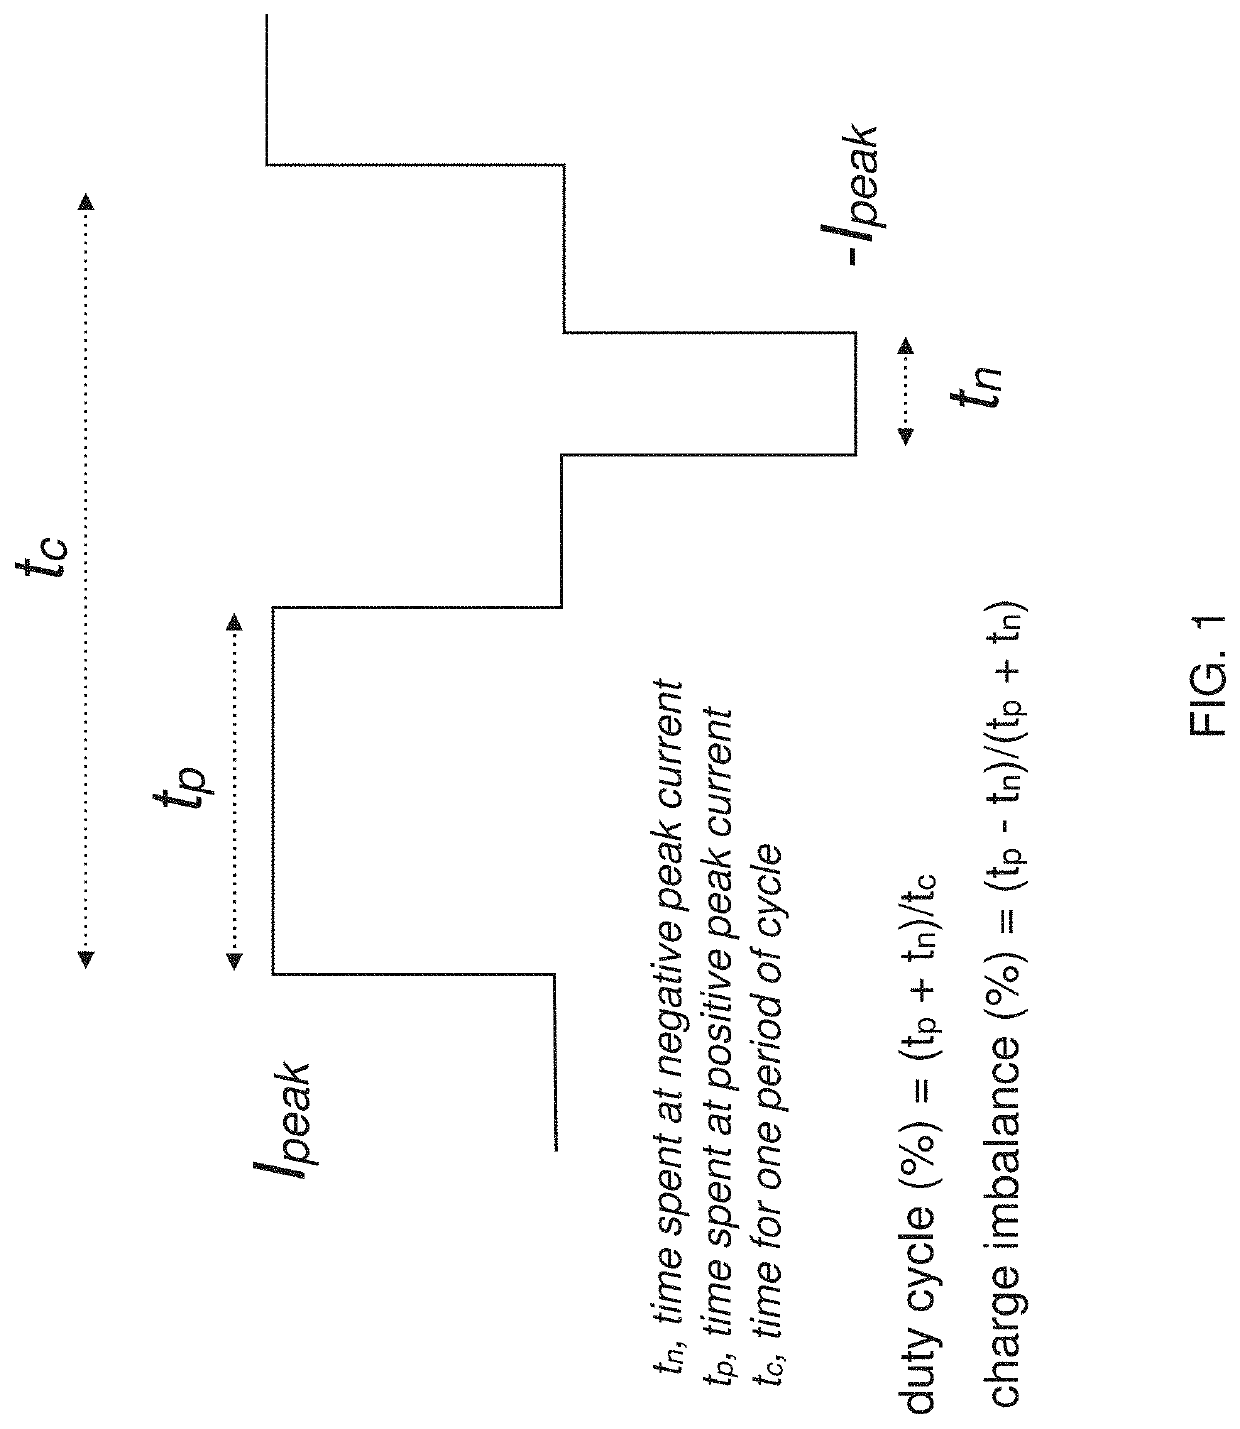 Systems and methods for applying electrical energy to treat psoriasis